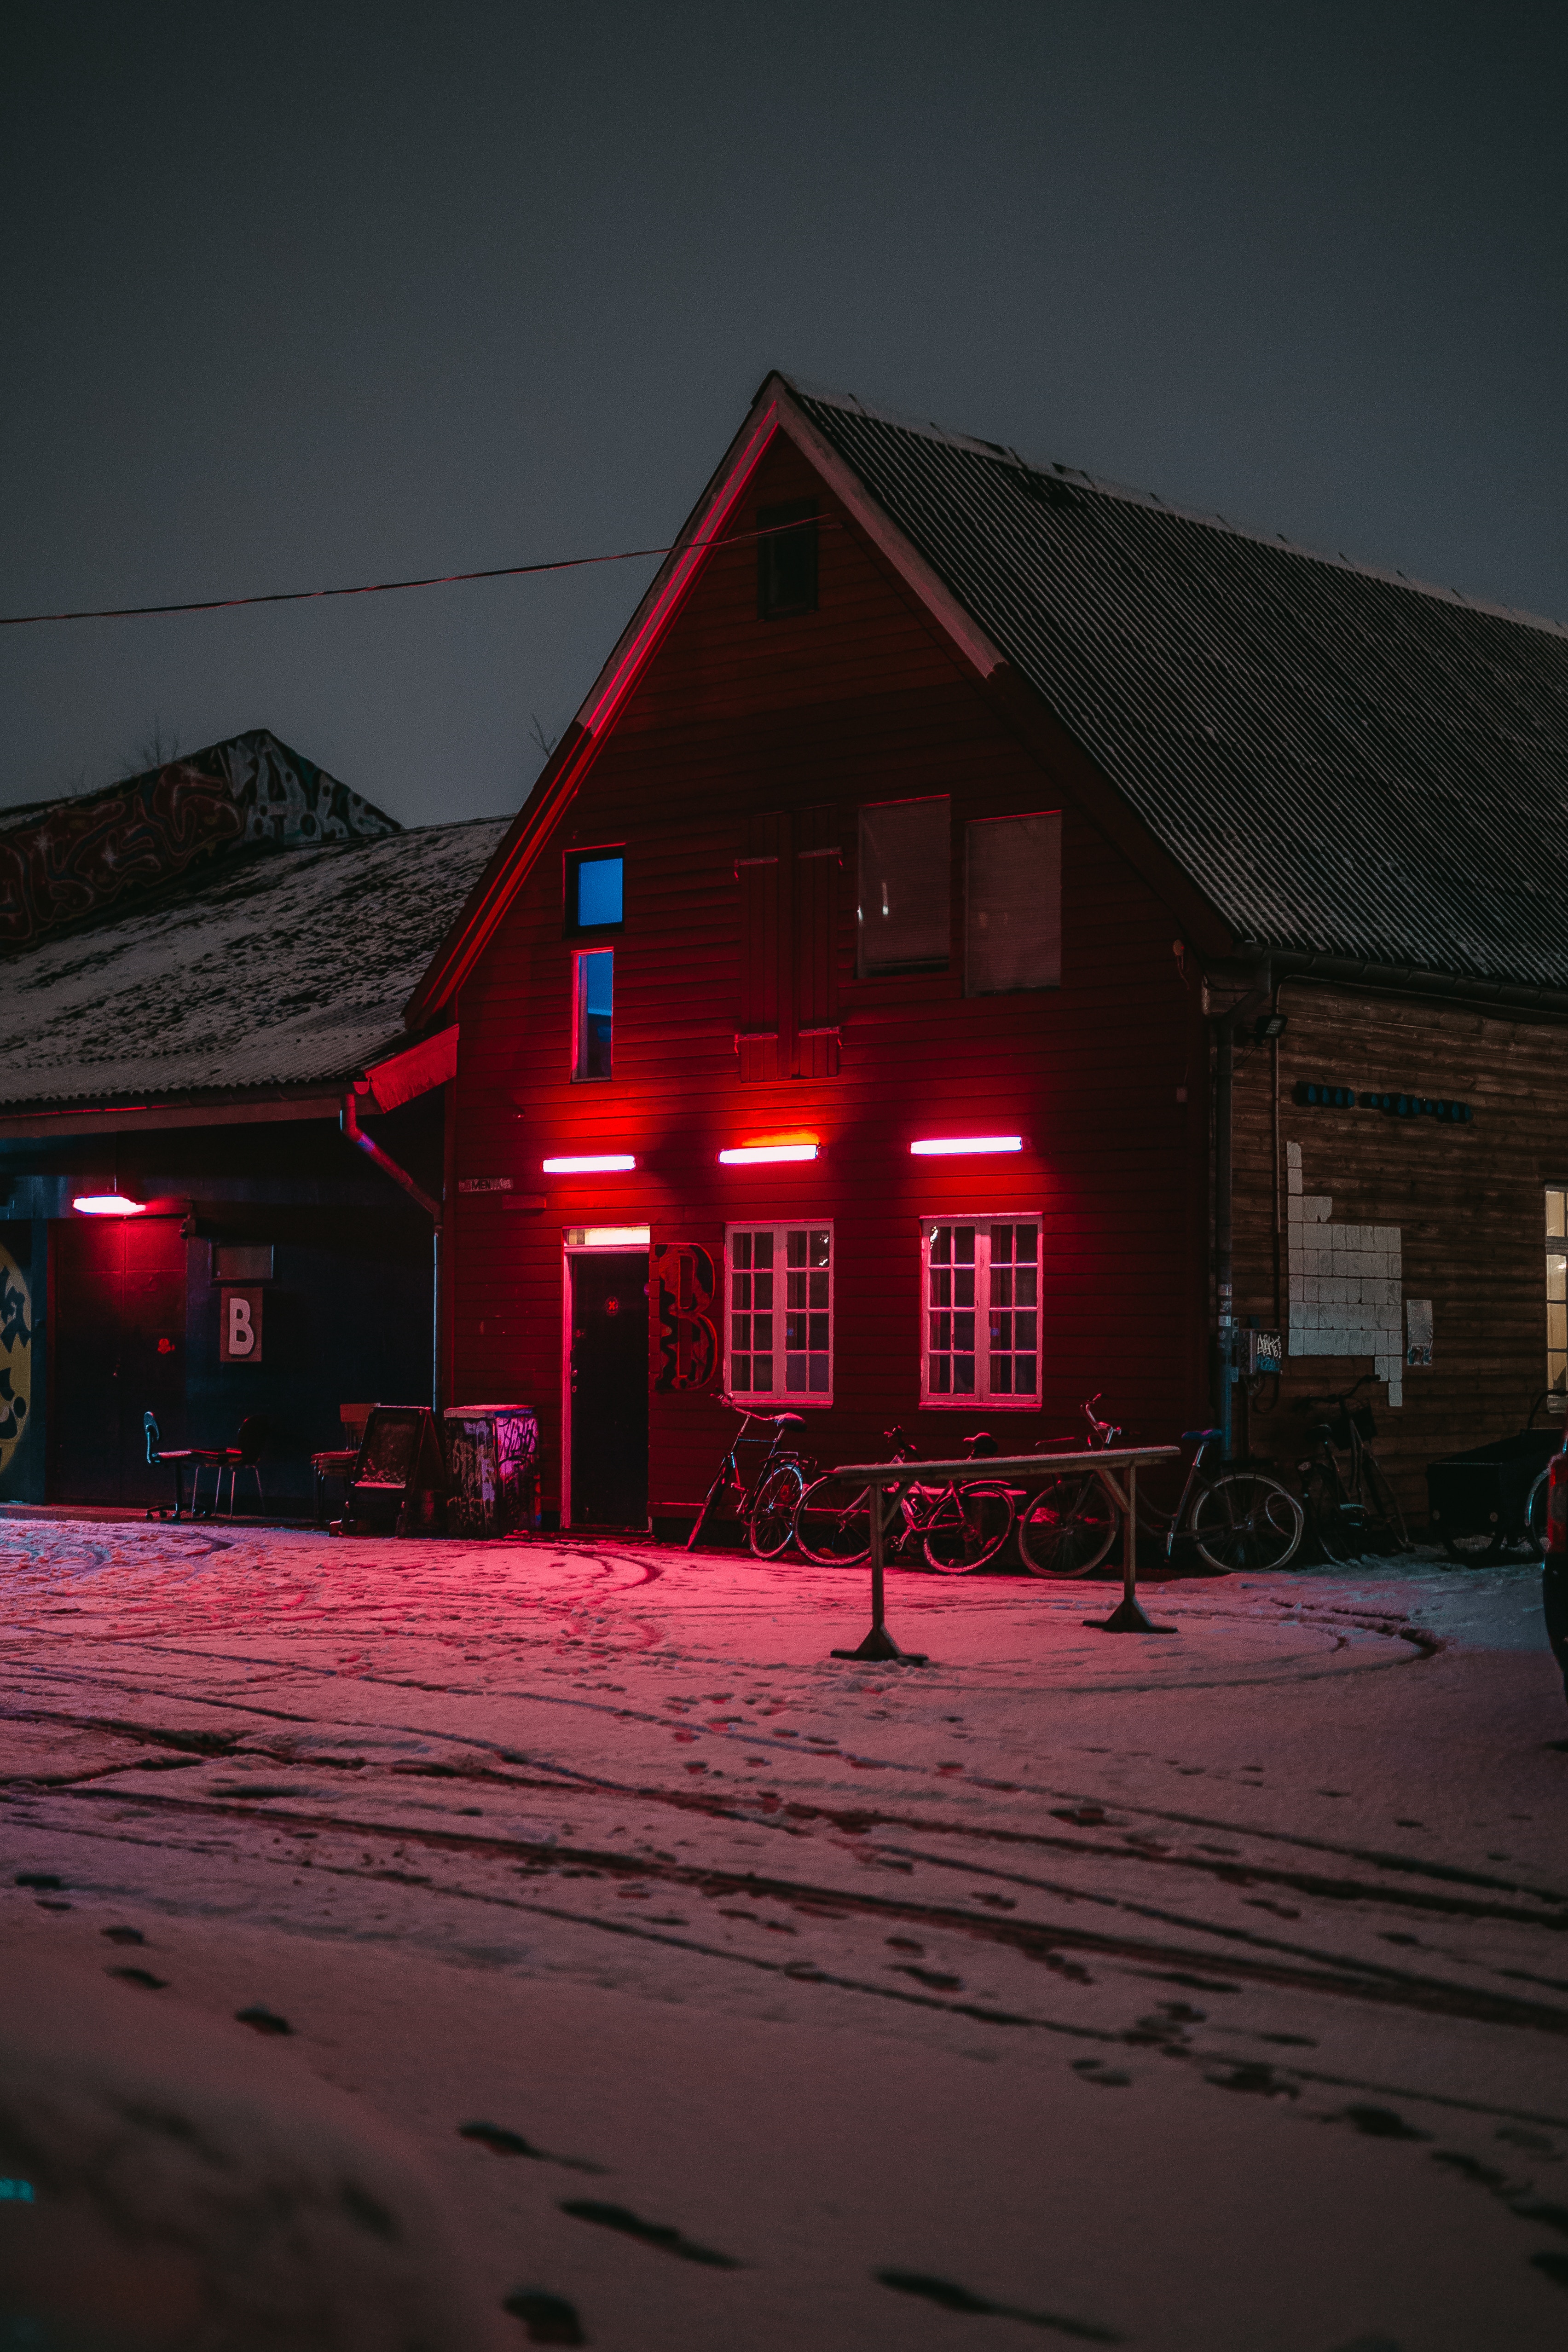 lodge, winter, bicycles, red, dark, shine, light, small house